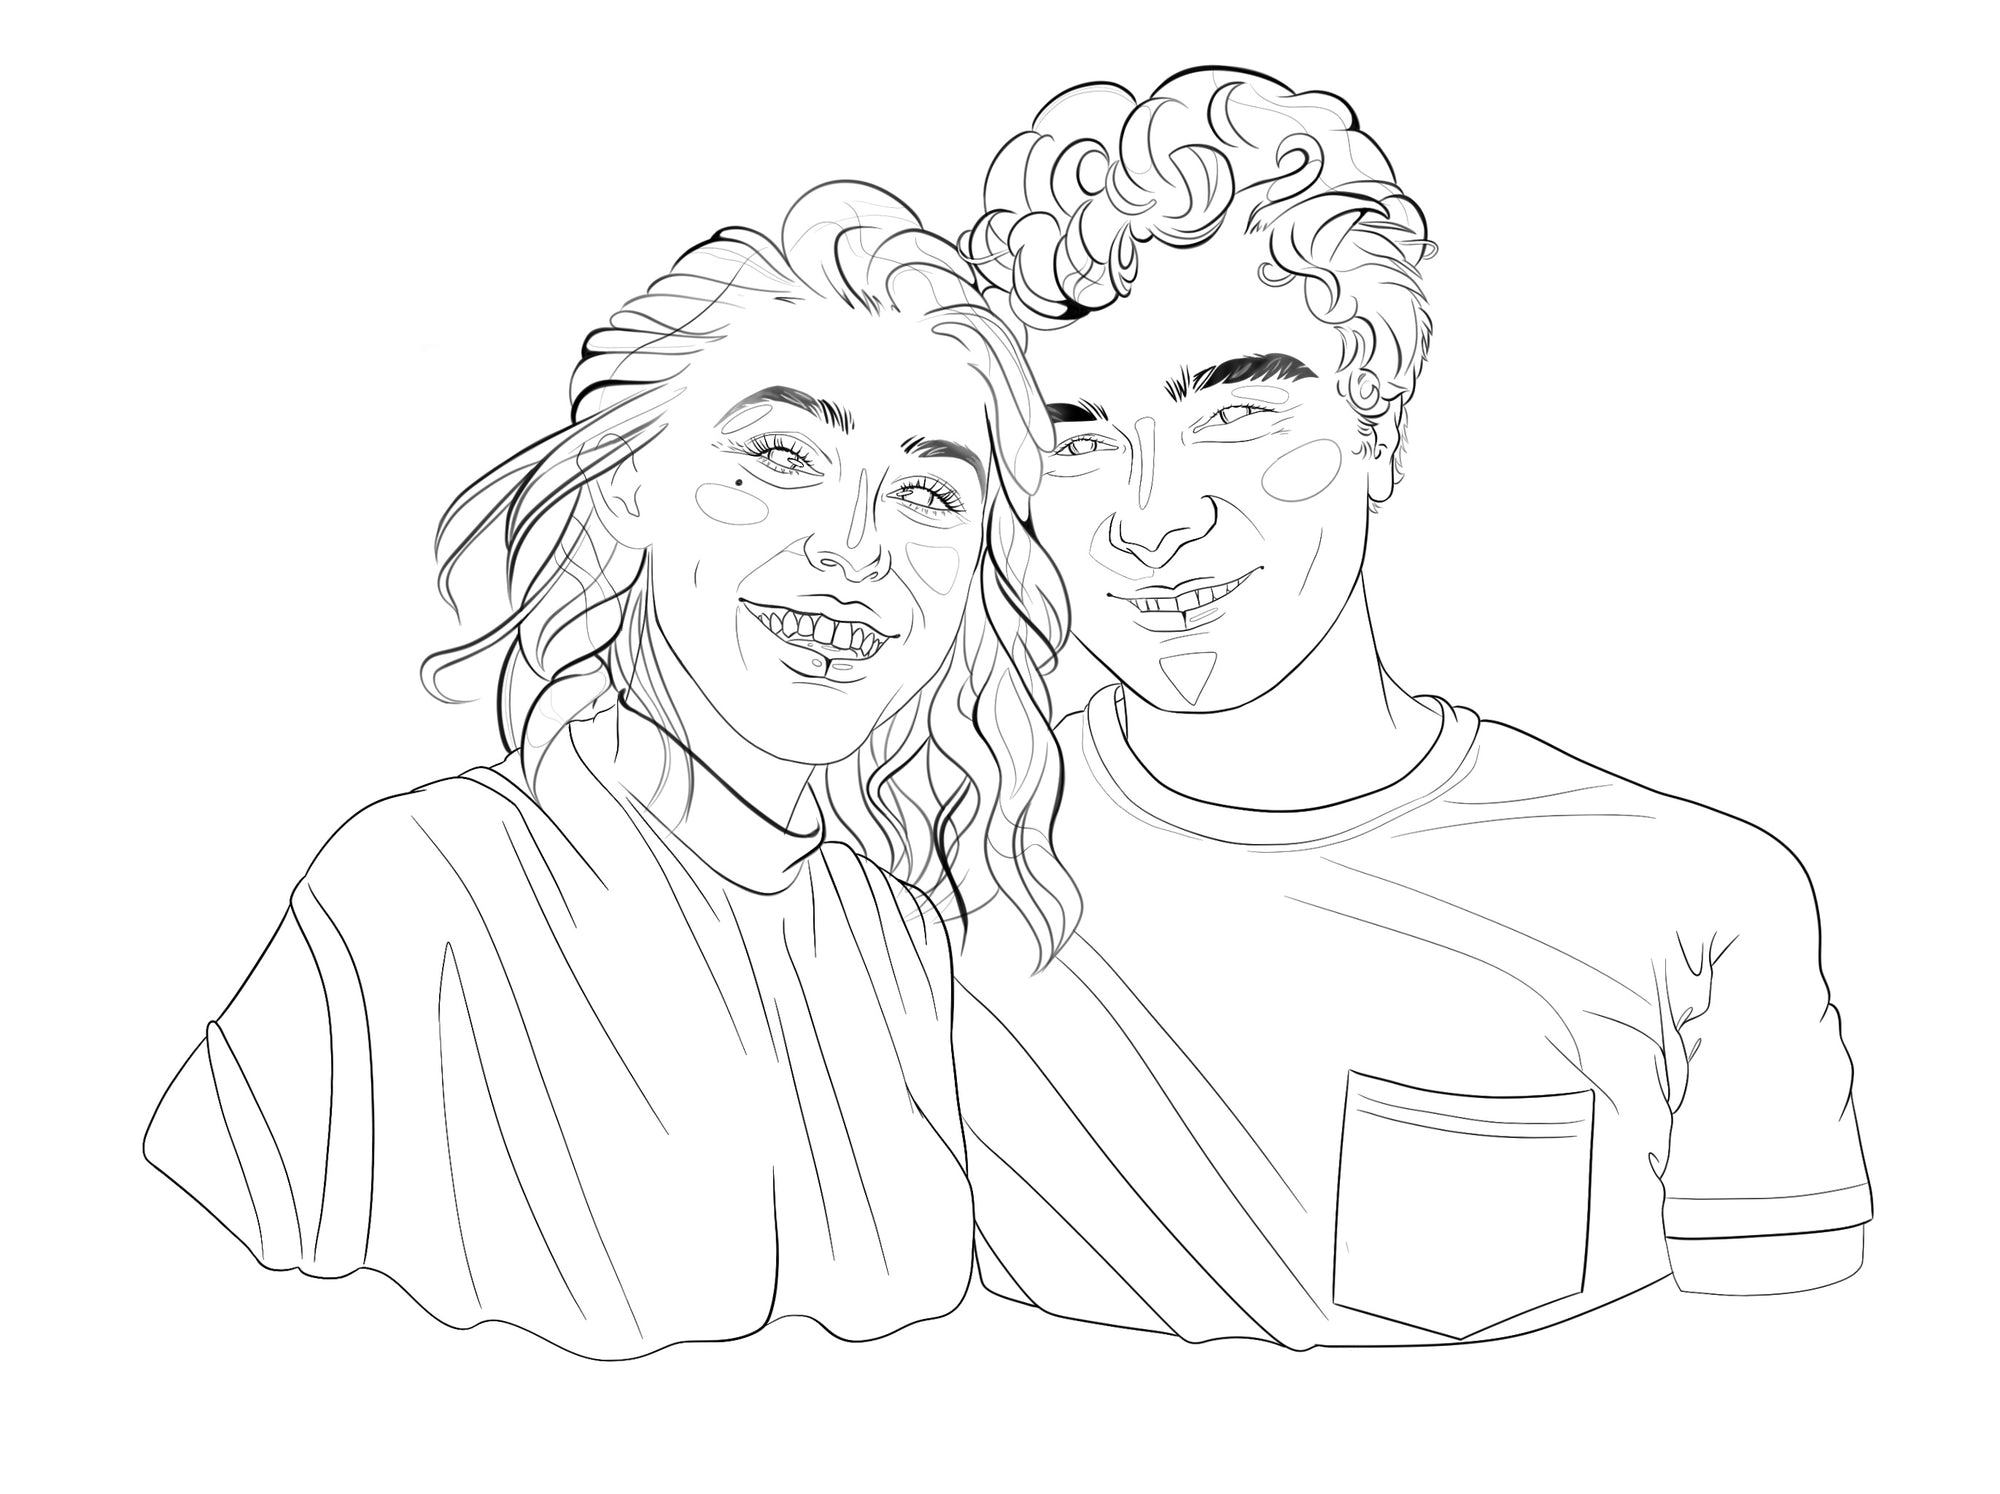 A black and white image of a digital line portrait of a smiling hetero couple